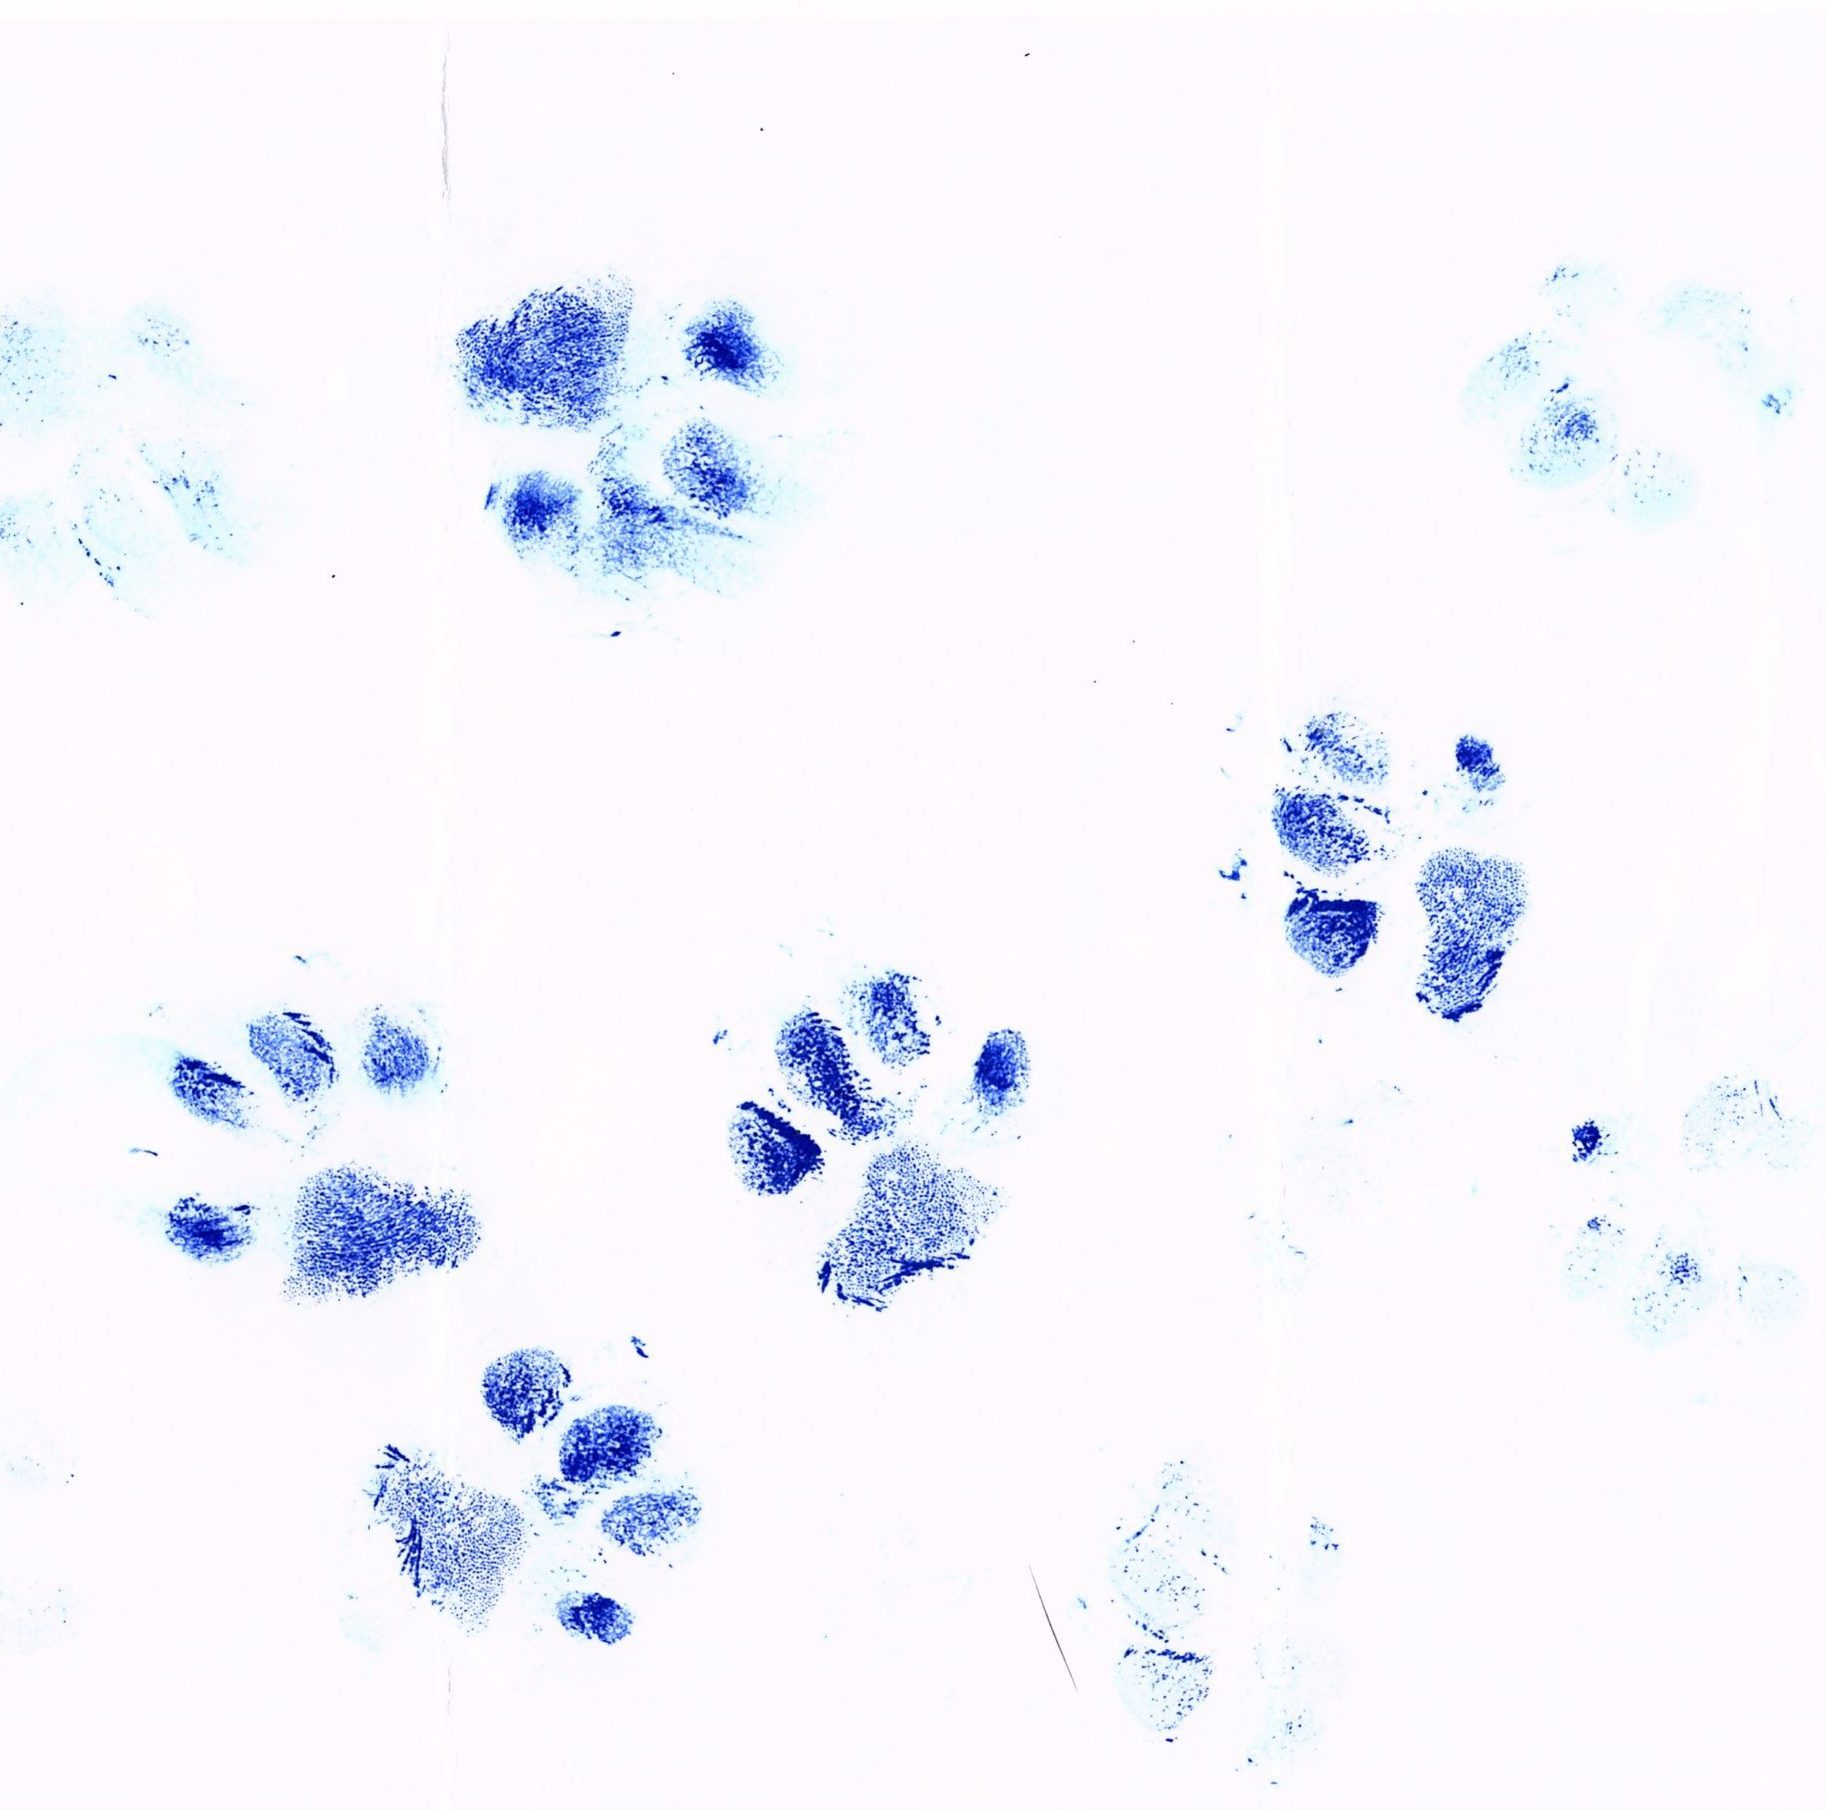 How To Get A Dog Paw Print - It's Easier Than You Think - Cheeky